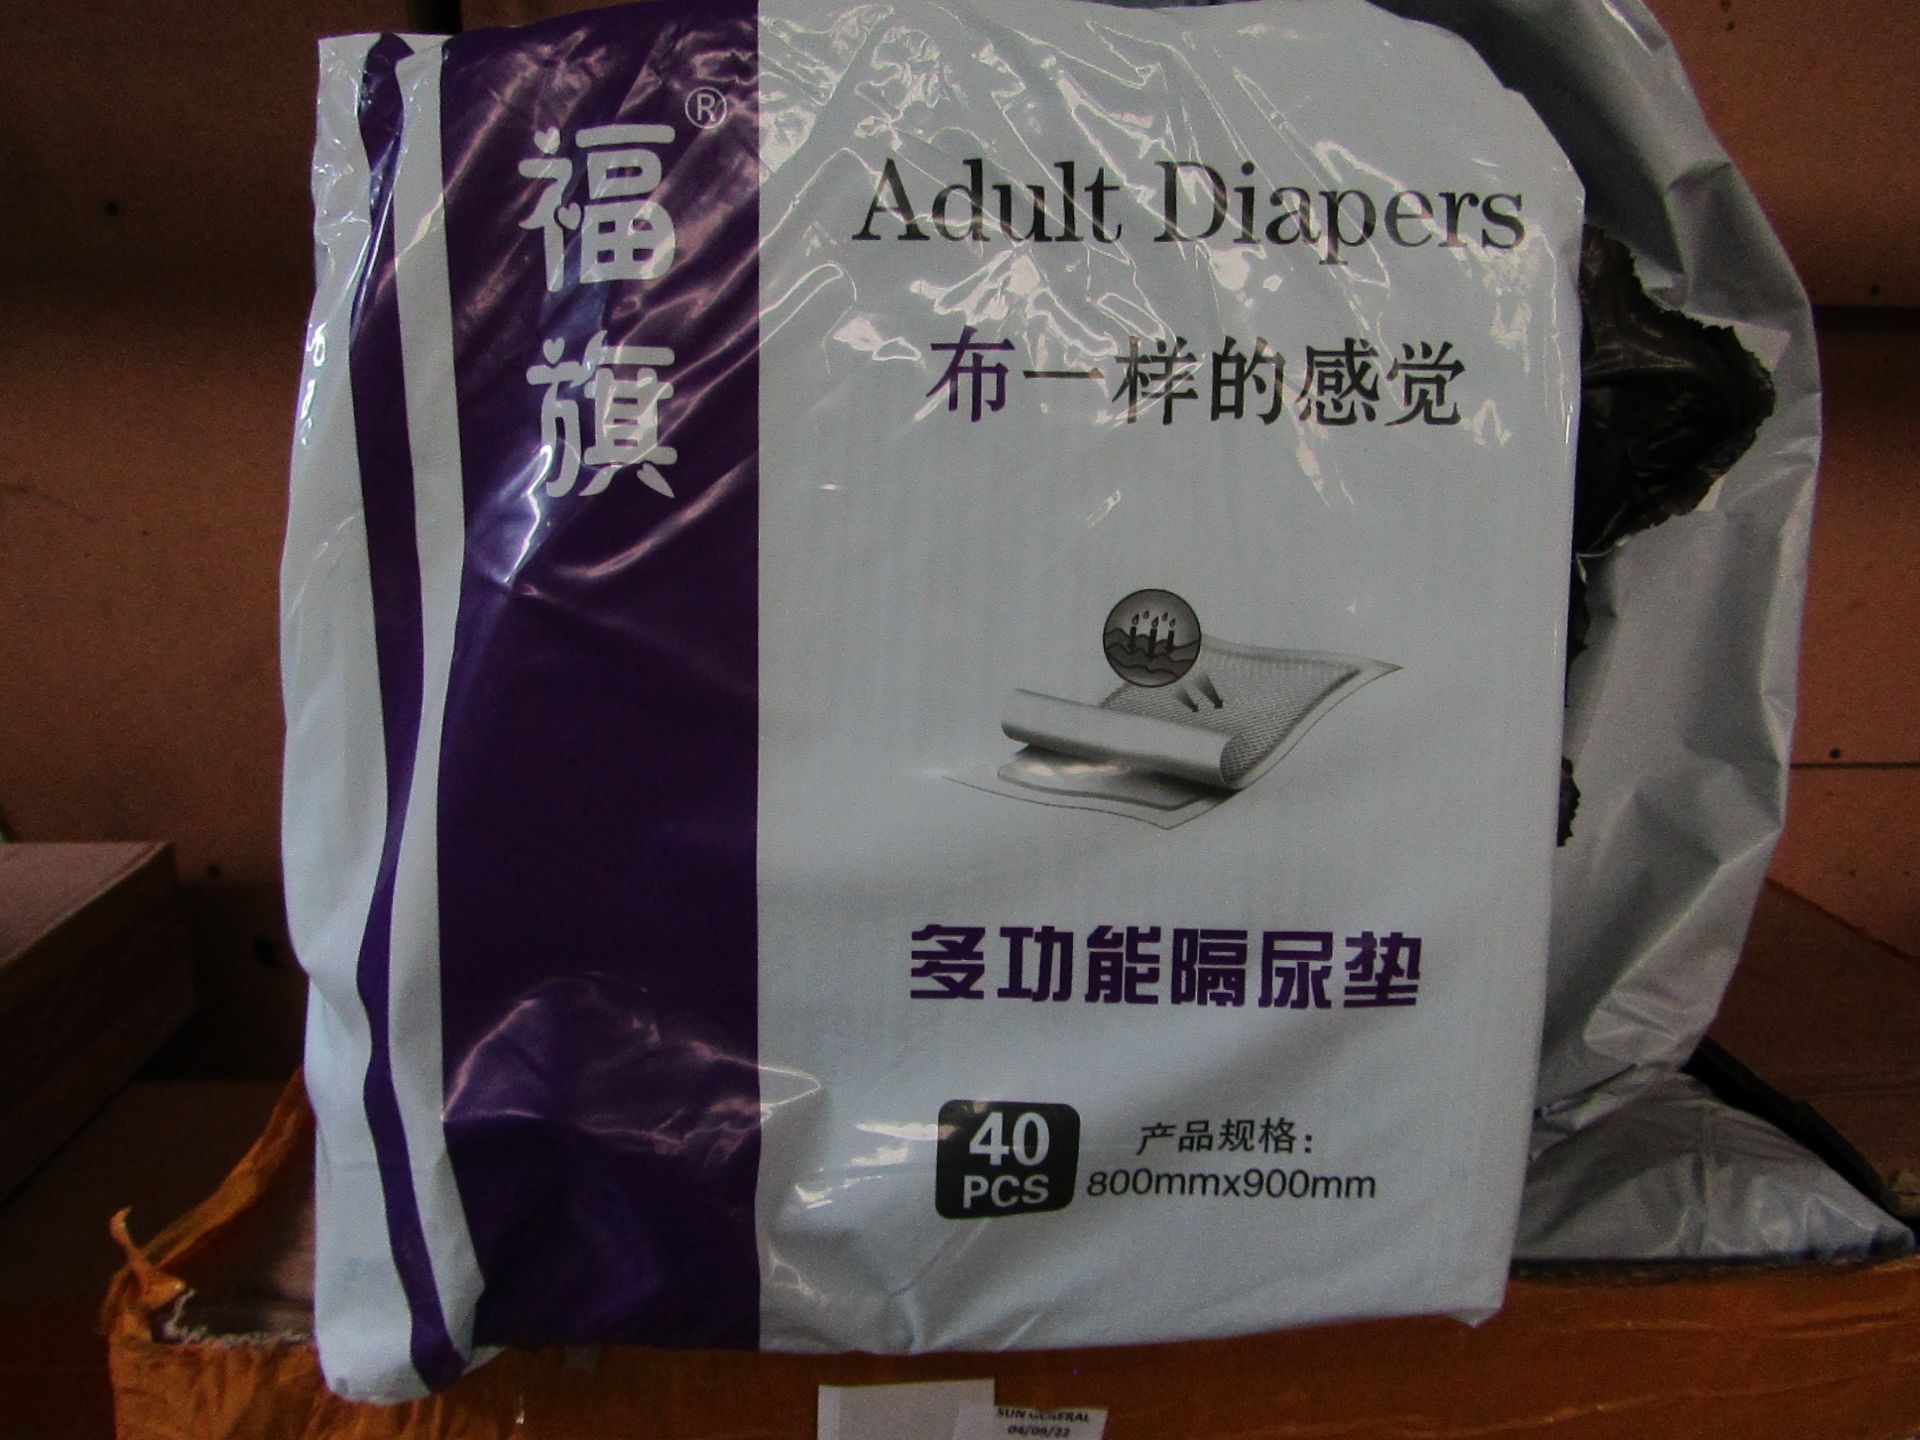 2x Adult Diapers ( 800mm X 800mm ) 40-Diapers Per Pack - Unused & Packaged.